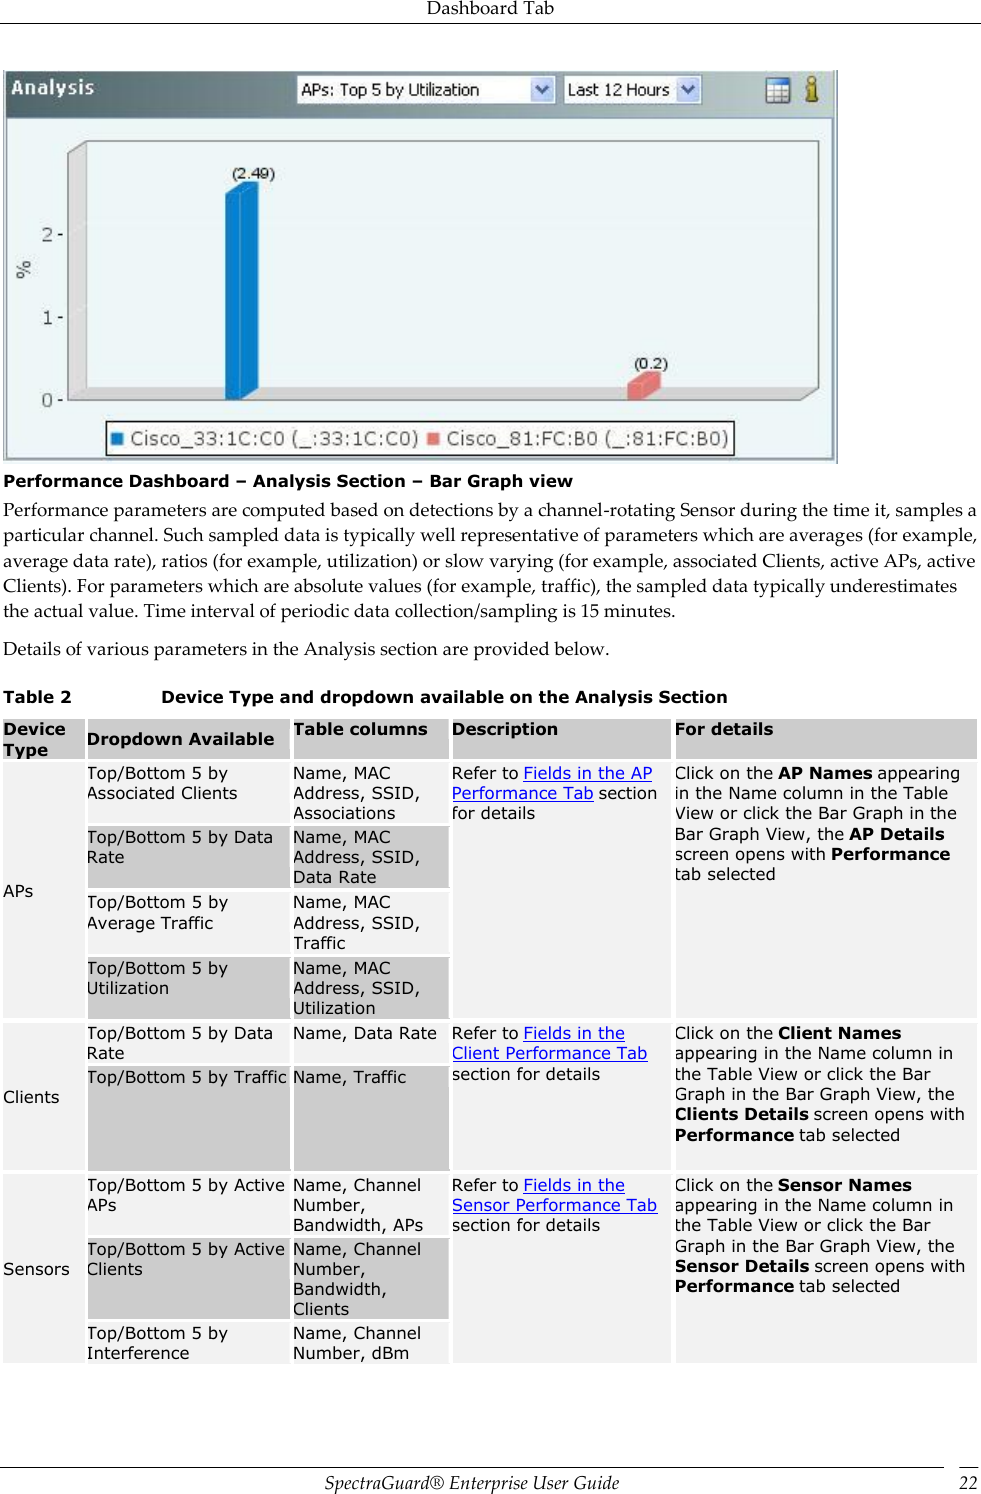 Dashboard Tab SpectraGuard®  Enterprise User Guide 22  Performance Dashboard – Analysis Section – Bar Graph view Performance parameters are computed based on detections by a channel-rotating Sensor during the time it, samples a particular channel. Such sampled data is typically well representative of parameters which are averages (for example, average data rate), ratios (for example, utilization) or slow varying (for example, associated Clients, active APs, active Clients). For parameters which are absolute values (for example, traffic), the sampled data typically underestimates the actual value. Time interval of periodic data collection/sampling is 15 minutes. Details of various parameters in the Analysis section are provided below. Table 2                        Device Type and dropdown available on the Analysis Section Device Type Dropdown Available Table columns Description For details APs Top/Bottom 5 by Associated Clients Name, MAC Address, SSID, Associations Refer to Fields in the AP Performance Tab section for details Click on the AP Names appearing in the Name column in the Table View or click the Bar Graph in the Bar Graph View, the AP Details screen opens with Performance tab selected Top/Bottom 5 by Data Rate Name, MAC Address, SSID, Data Rate Top/Bottom 5 by Average Traffic Name, MAC Address, SSID, Traffic Top/Bottom 5 by Utilization Name, MAC Address, SSID, Utilization Clients Top/Bottom 5 by Data Rate Name, Data Rate Refer to Fields in the Client Performance Tab section for details Click on the Client Names appearing in the Name column in the Table View or click the Bar Graph in the Bar Graph View, the Clients Details screen opens with Performance tab selected   Top/Bottom 5 by Traffic Name, Traffic Sensors Top/Bottom 5 by Active APs Name, Channel Number, Bandwidth, APs Refer to Fields in the Sensor Performance Tab section for details Click on the Sensor Names appearing in the Name column in the Table View or click the Bar Graph in the Bar Graph View, the Sensor Details screen opens with Performance tab selected Top/Bottom 5 by Active Clients Name, Channel Number, Bandwidth, Clients Top/Bottom 5 by Interference Name, Channel Number, dBm   